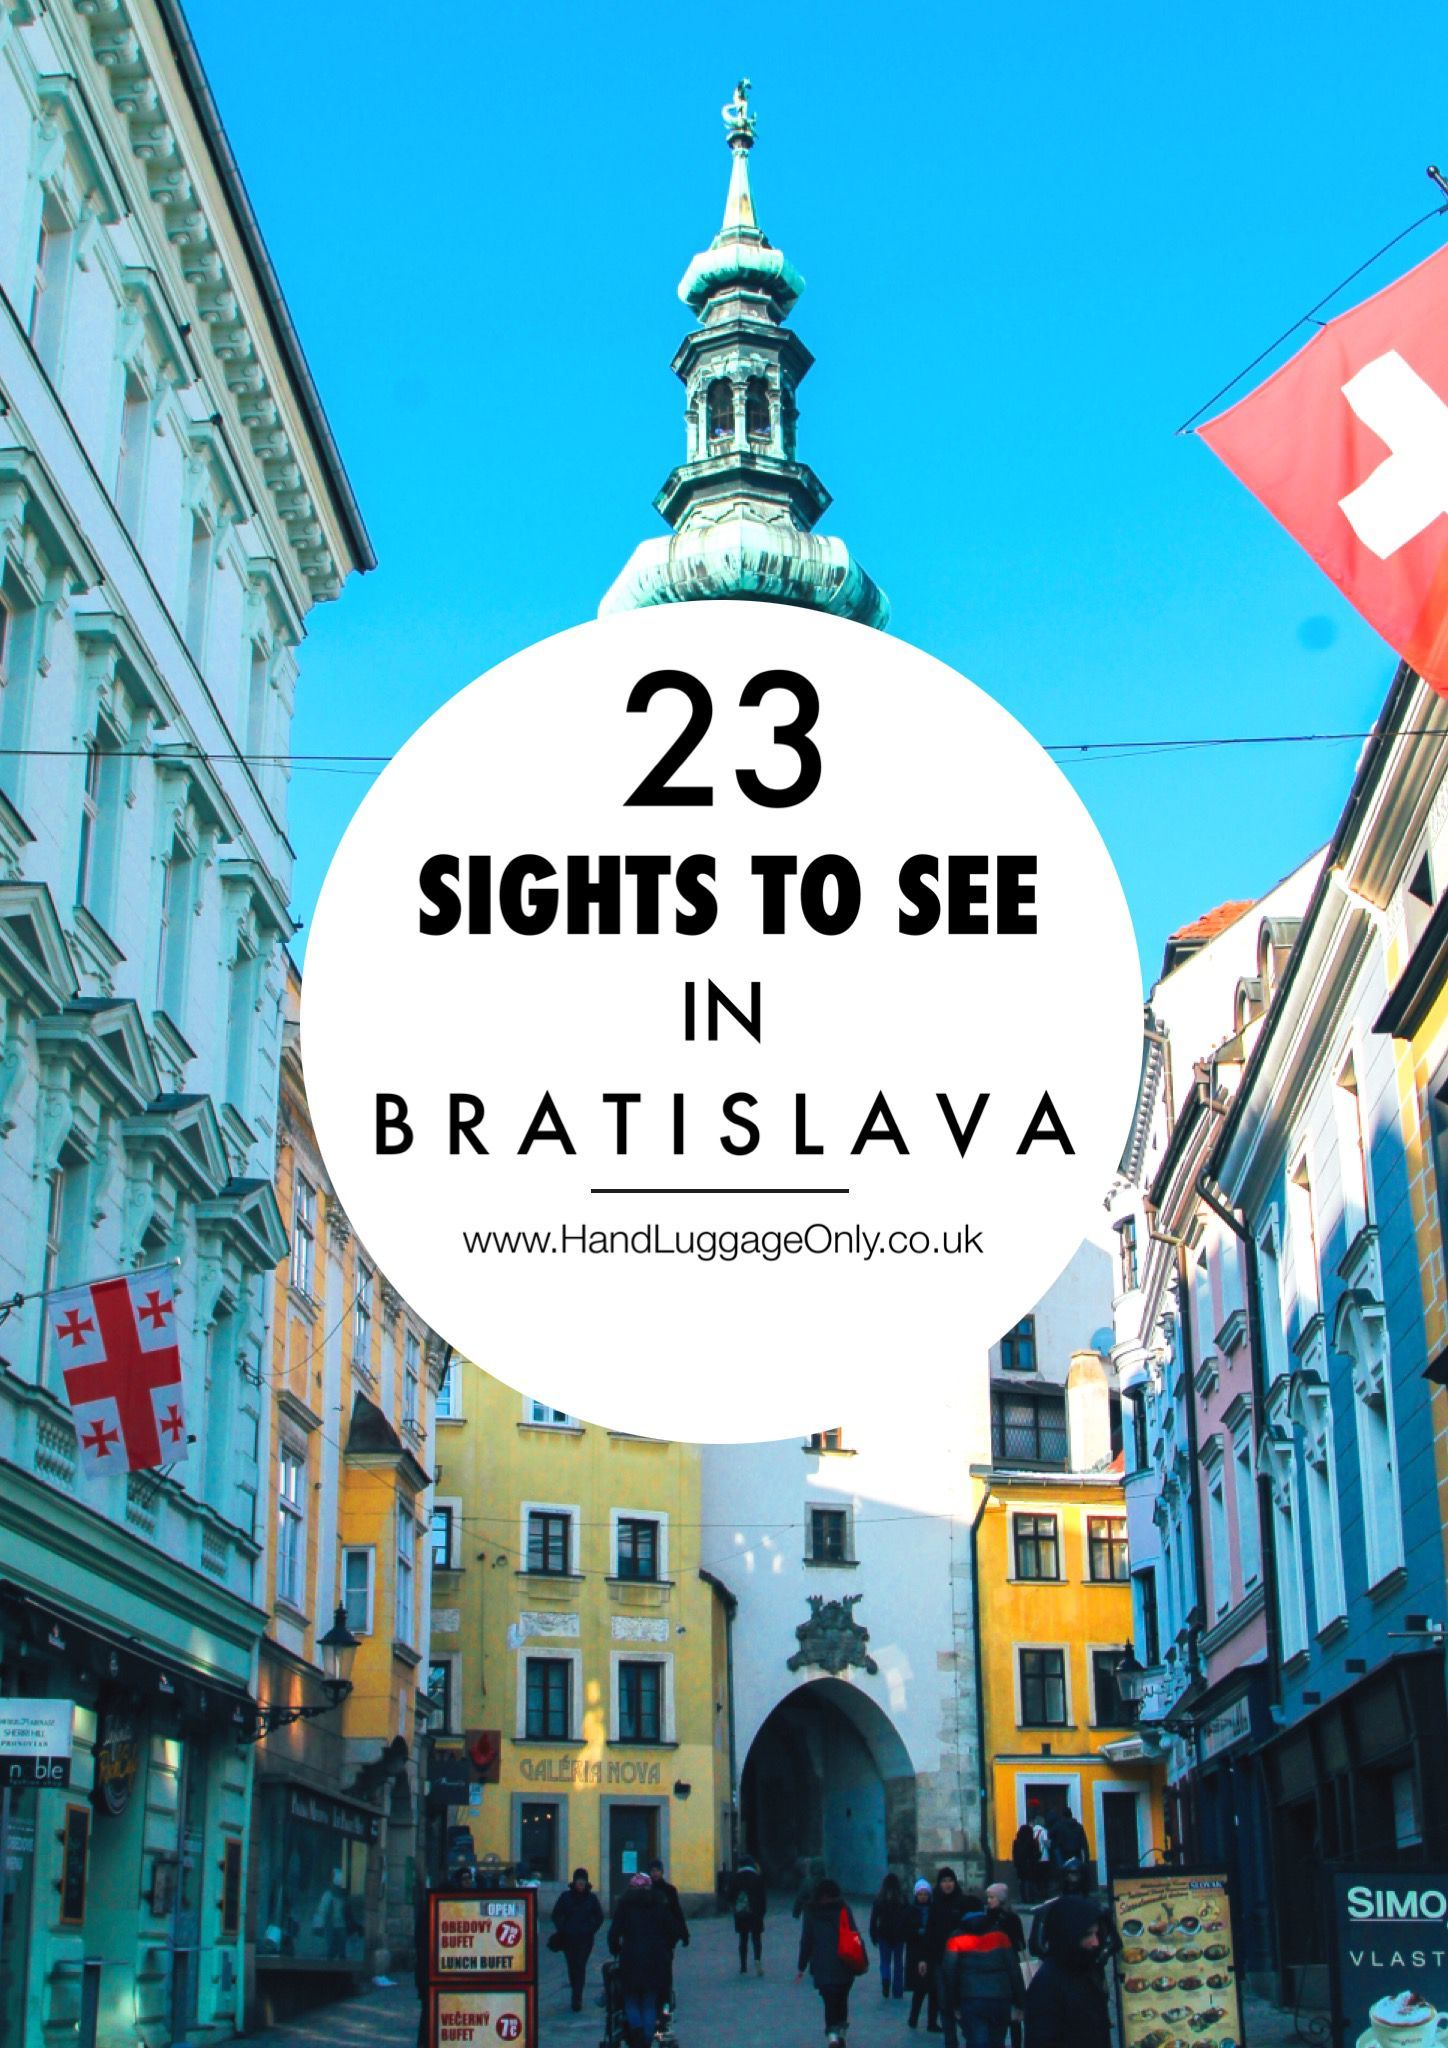 23 Things You Have To Do In Bratislava! | Bratislava, Hand luggage ...